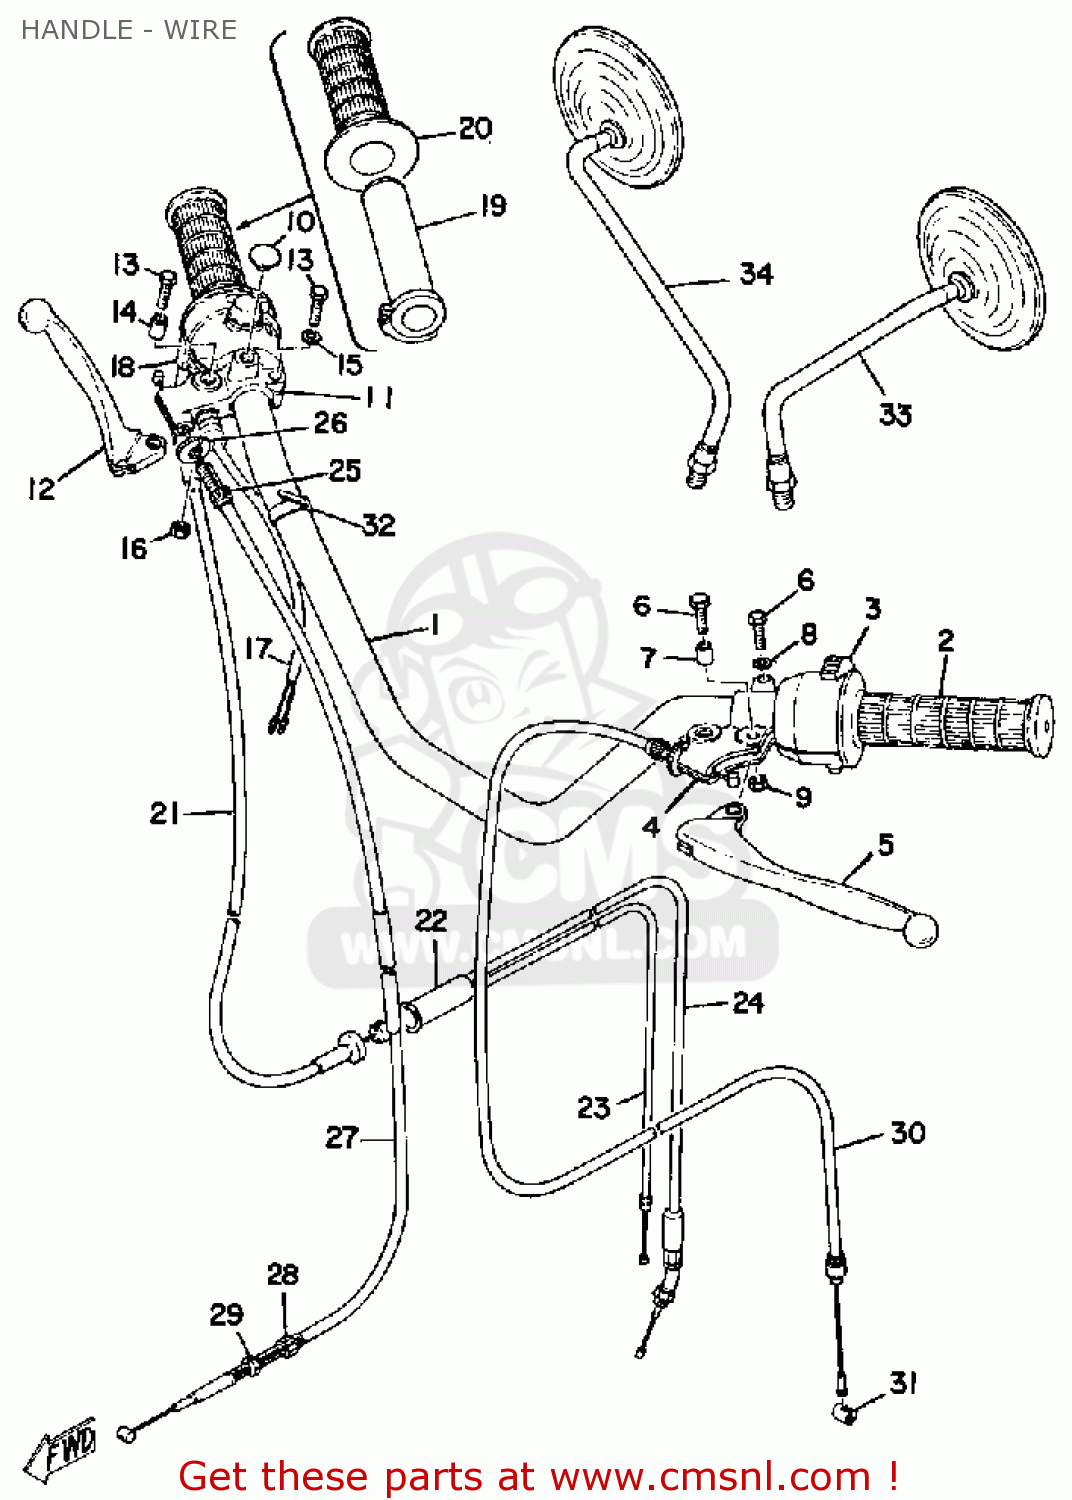 Yamaha Rs 100 Wiring Diagram | Motor Replacement Parts And ...